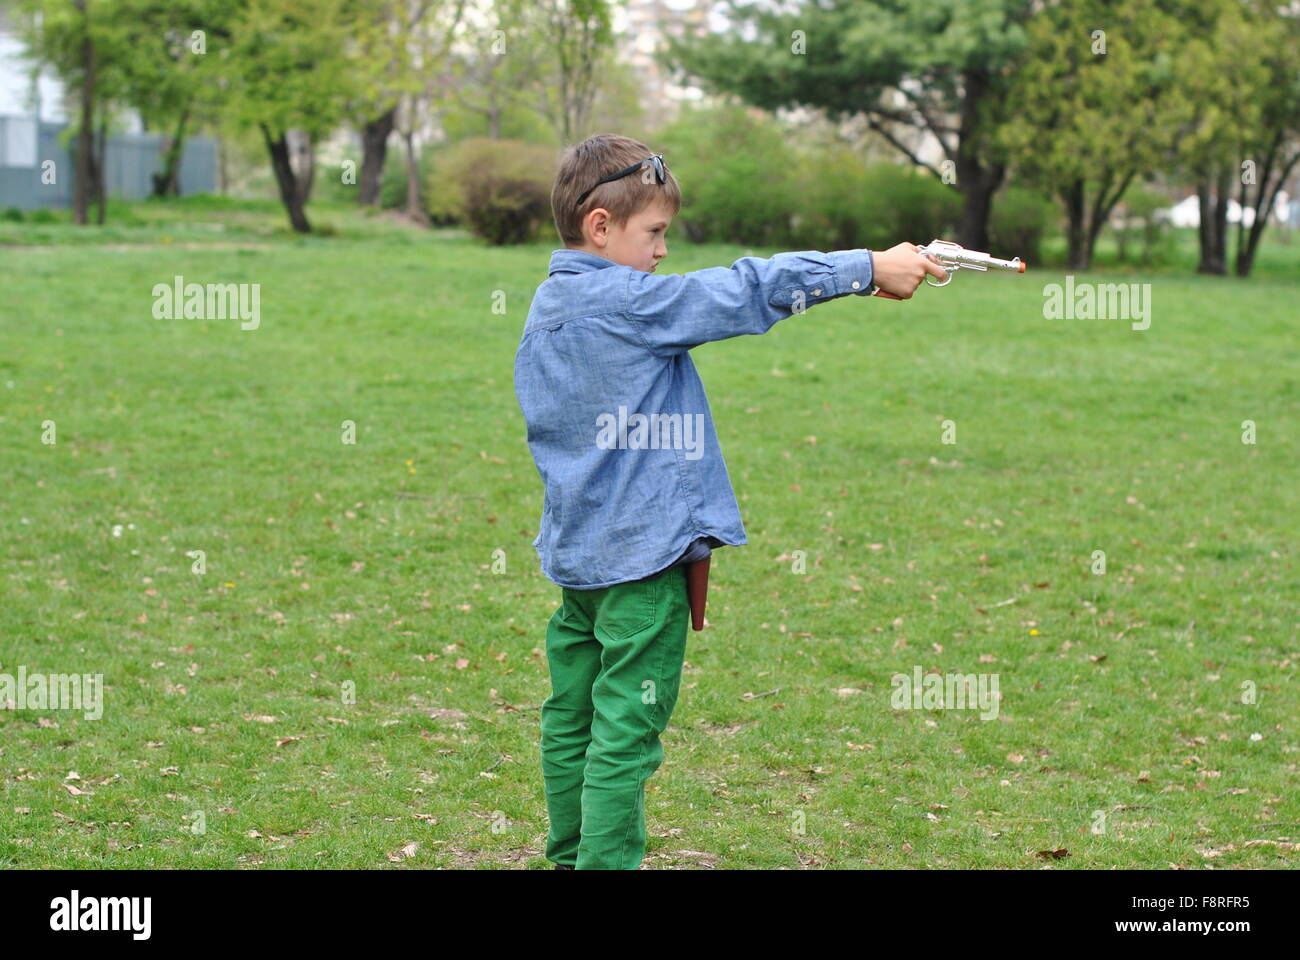 Boy playing with a toy gun Stock Photo